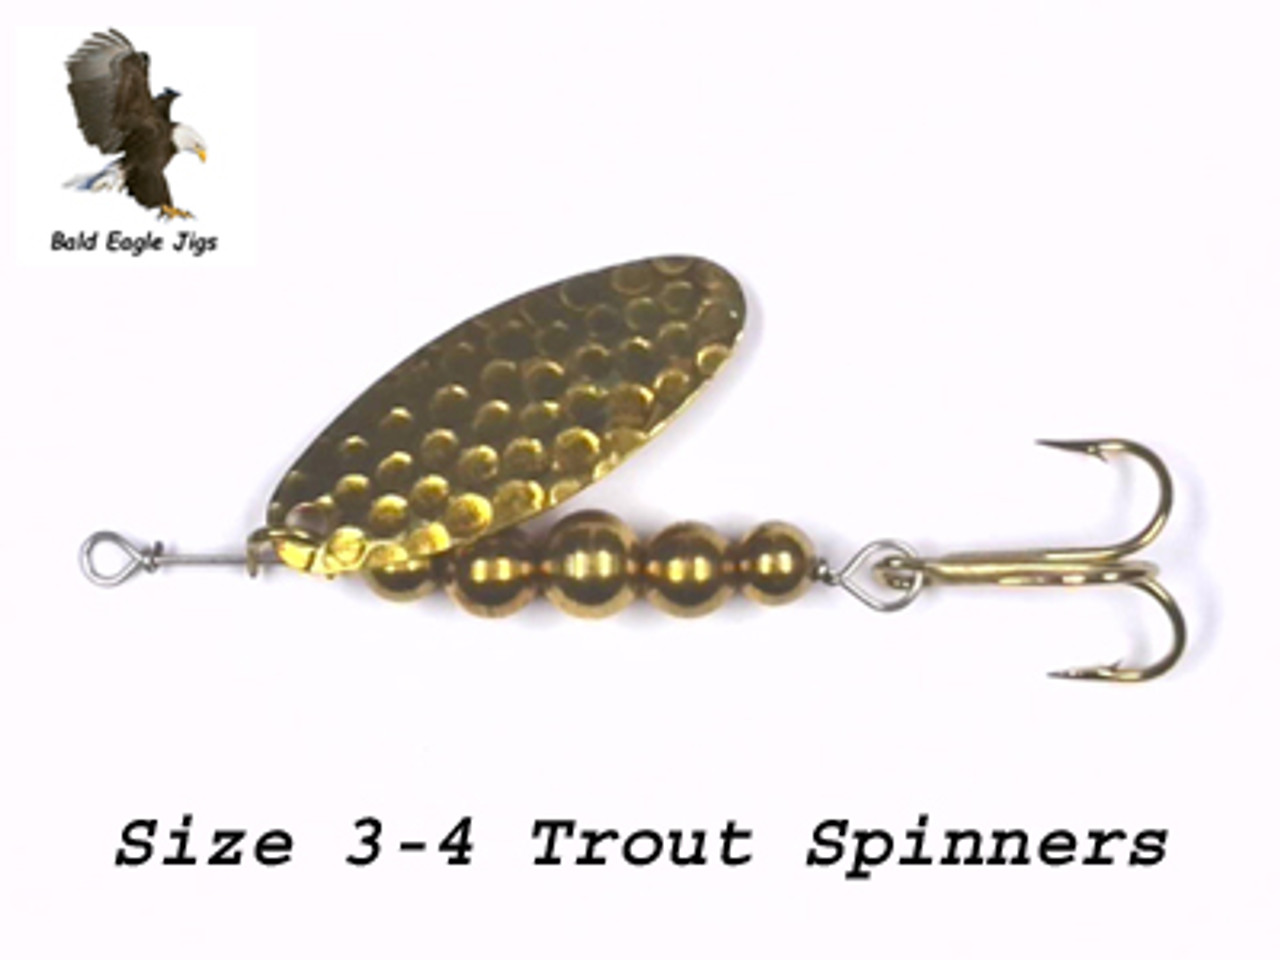 Mid Size Trout Spinners Size 3 - 4